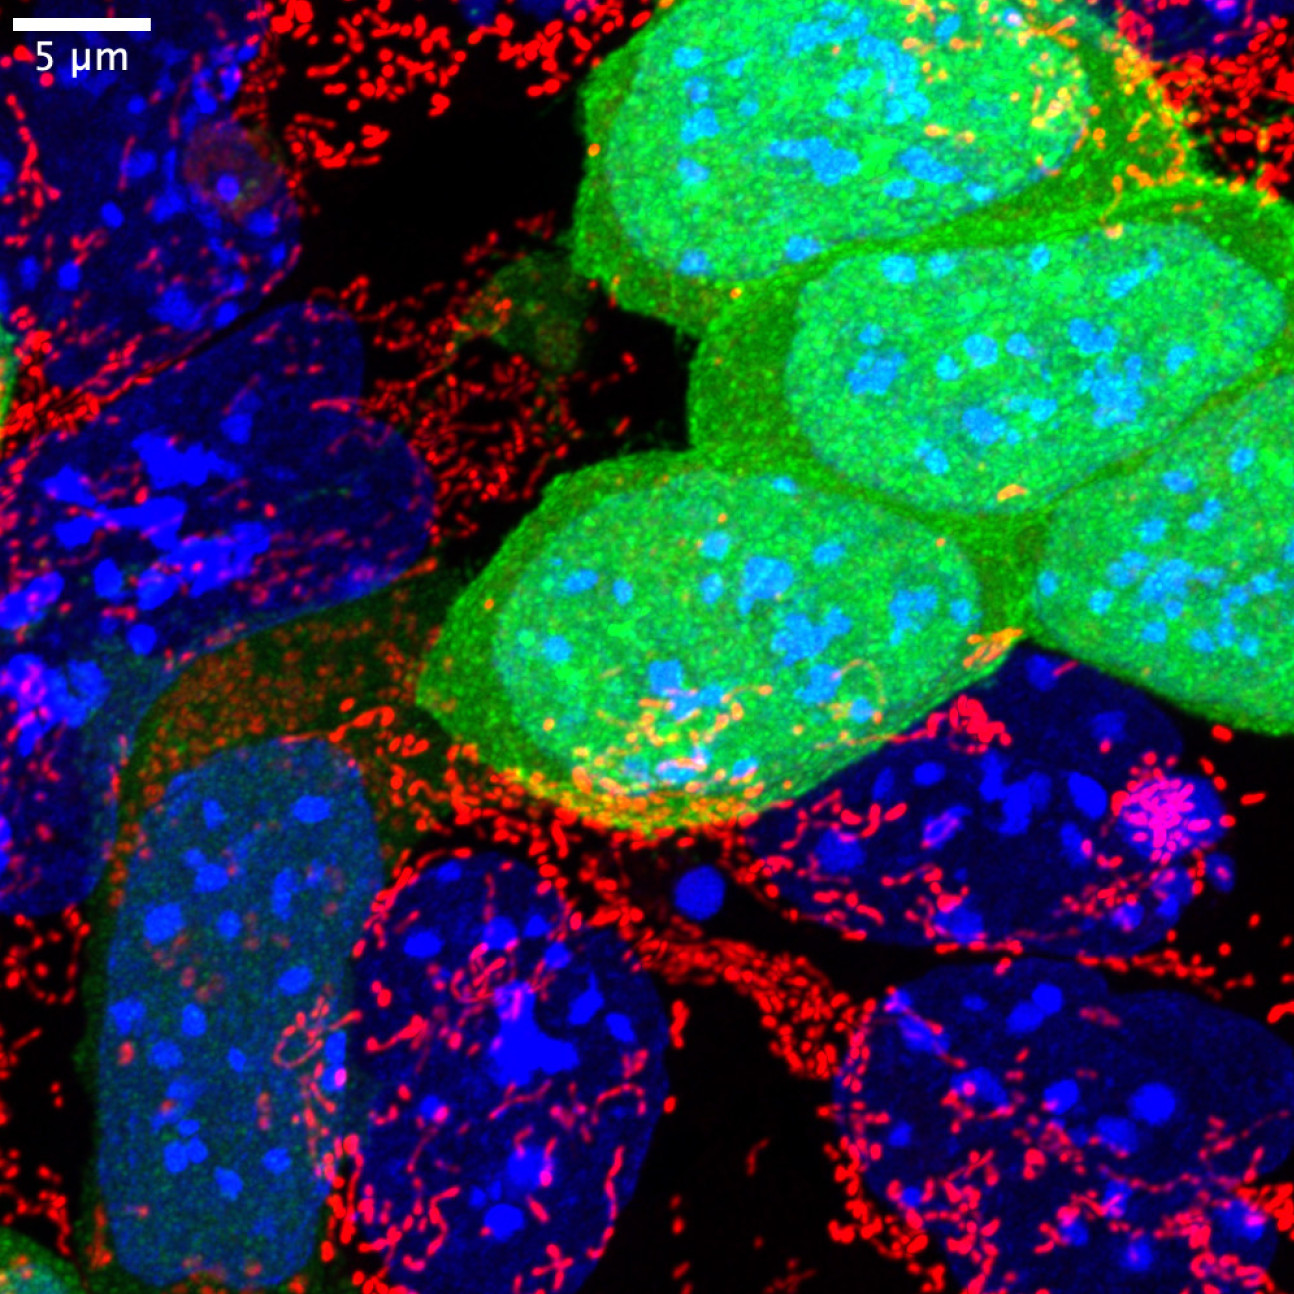 Embryonic stem cells with active mitochondria (labelled in red) and defective cells (labelled in green)